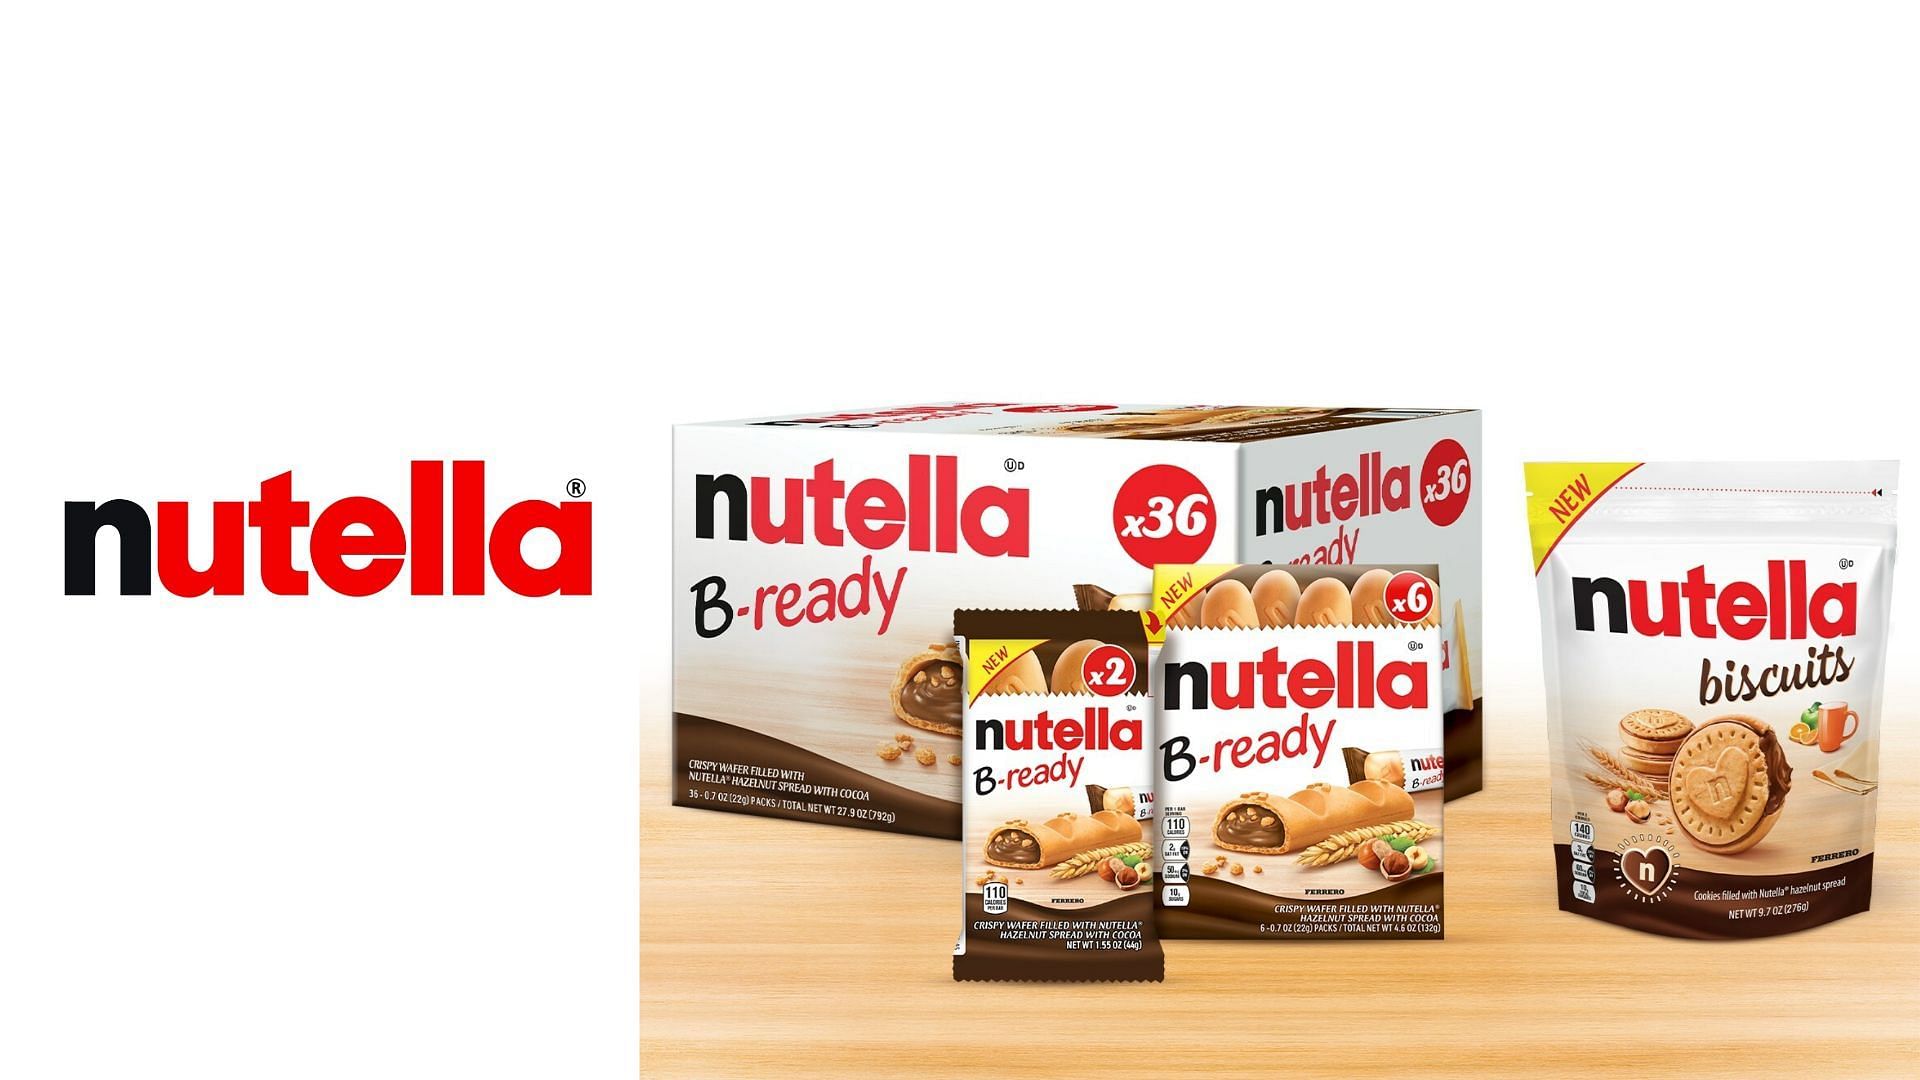 Nutella introduces two new products after a wait of 12 years (Image via Nutella)